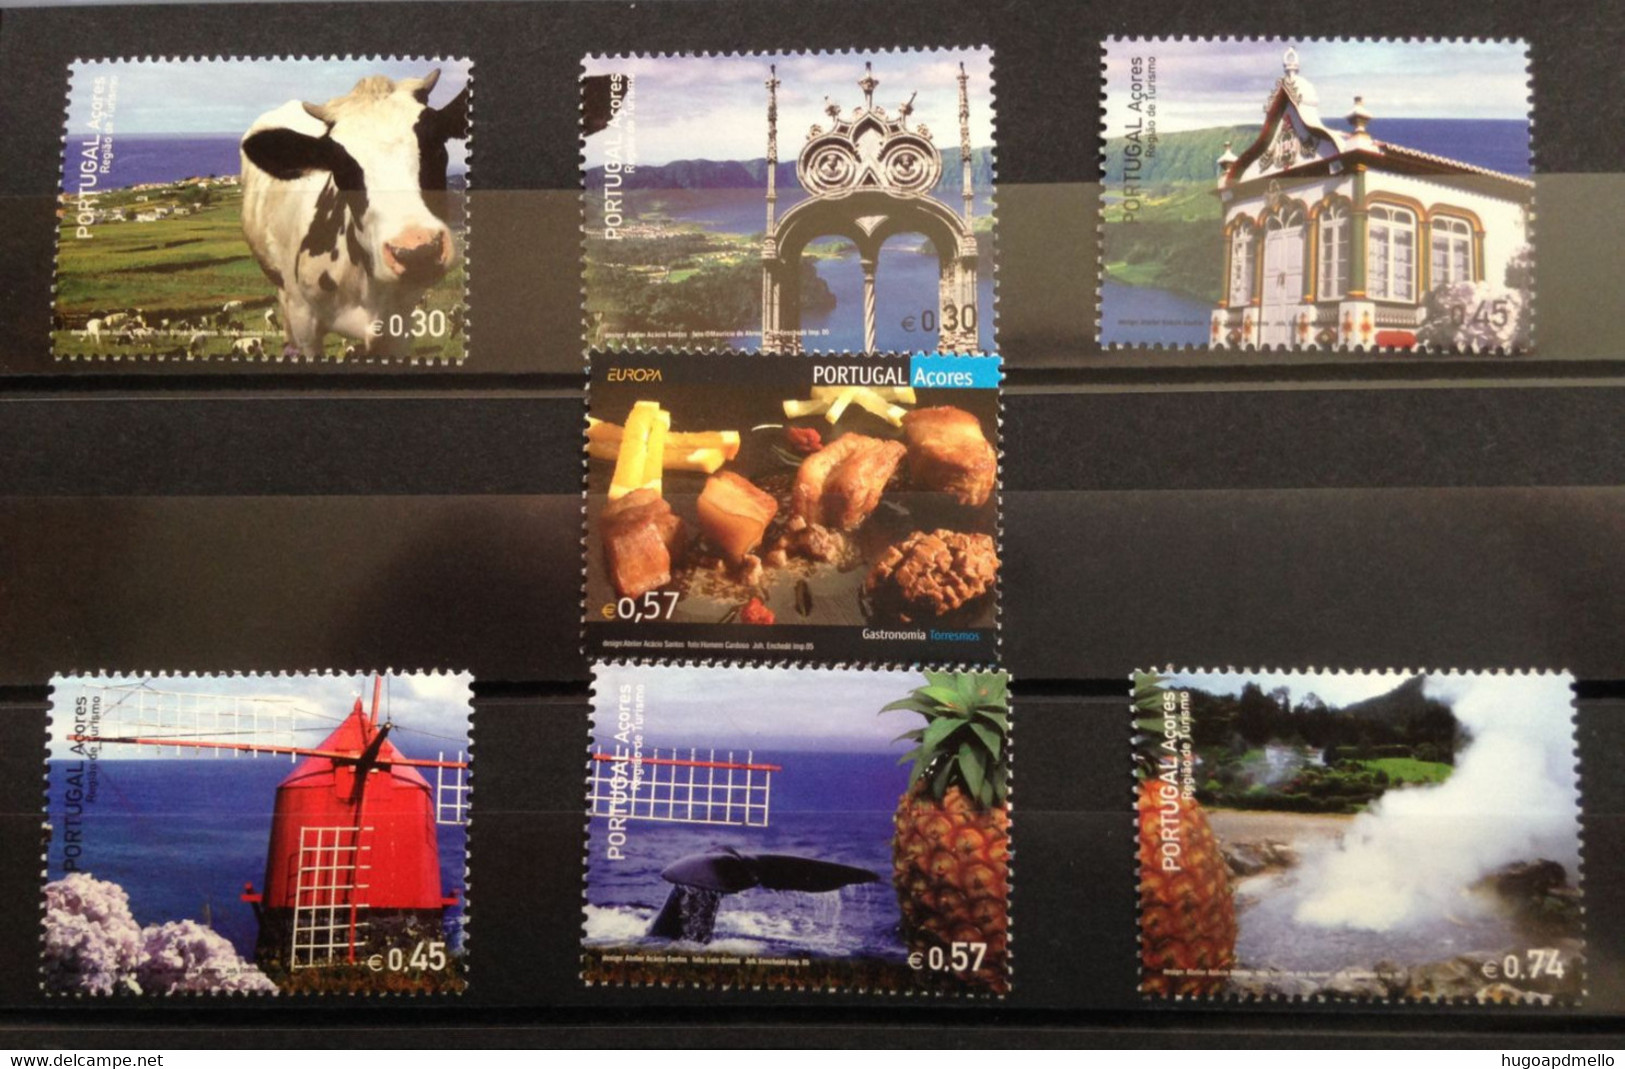 PORTUGAL, Azores, « Full Year », « Whales », « Fauna & Flora », « Wind Mills », « Gastronomy », « Architecture », 2005 - Années Complètes